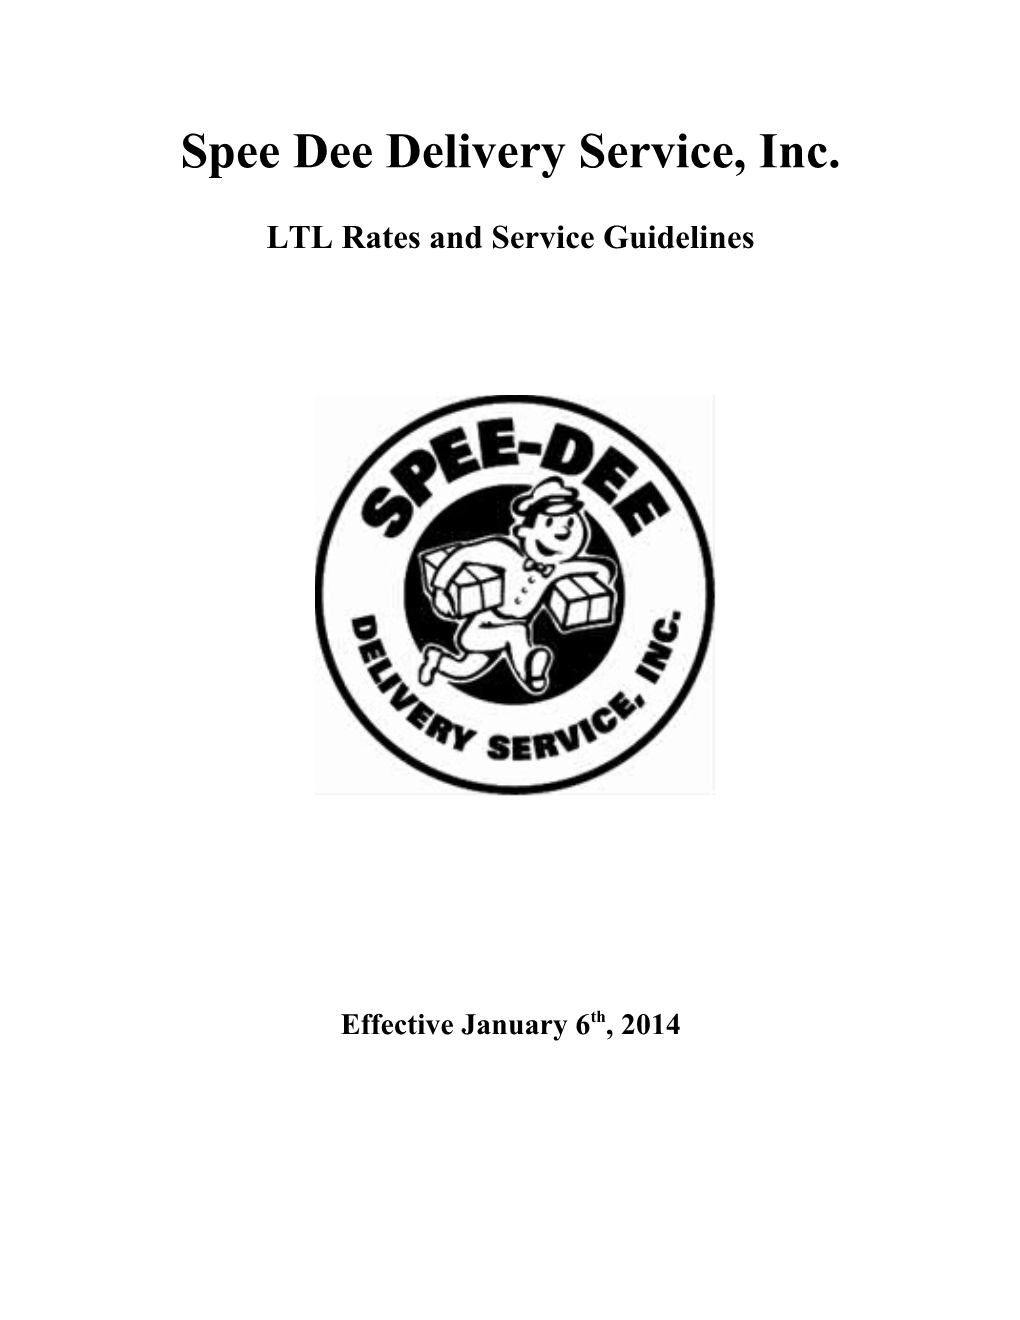 Spee Dee Delivery Service, Inc. LTL Rates and Service Guidelines